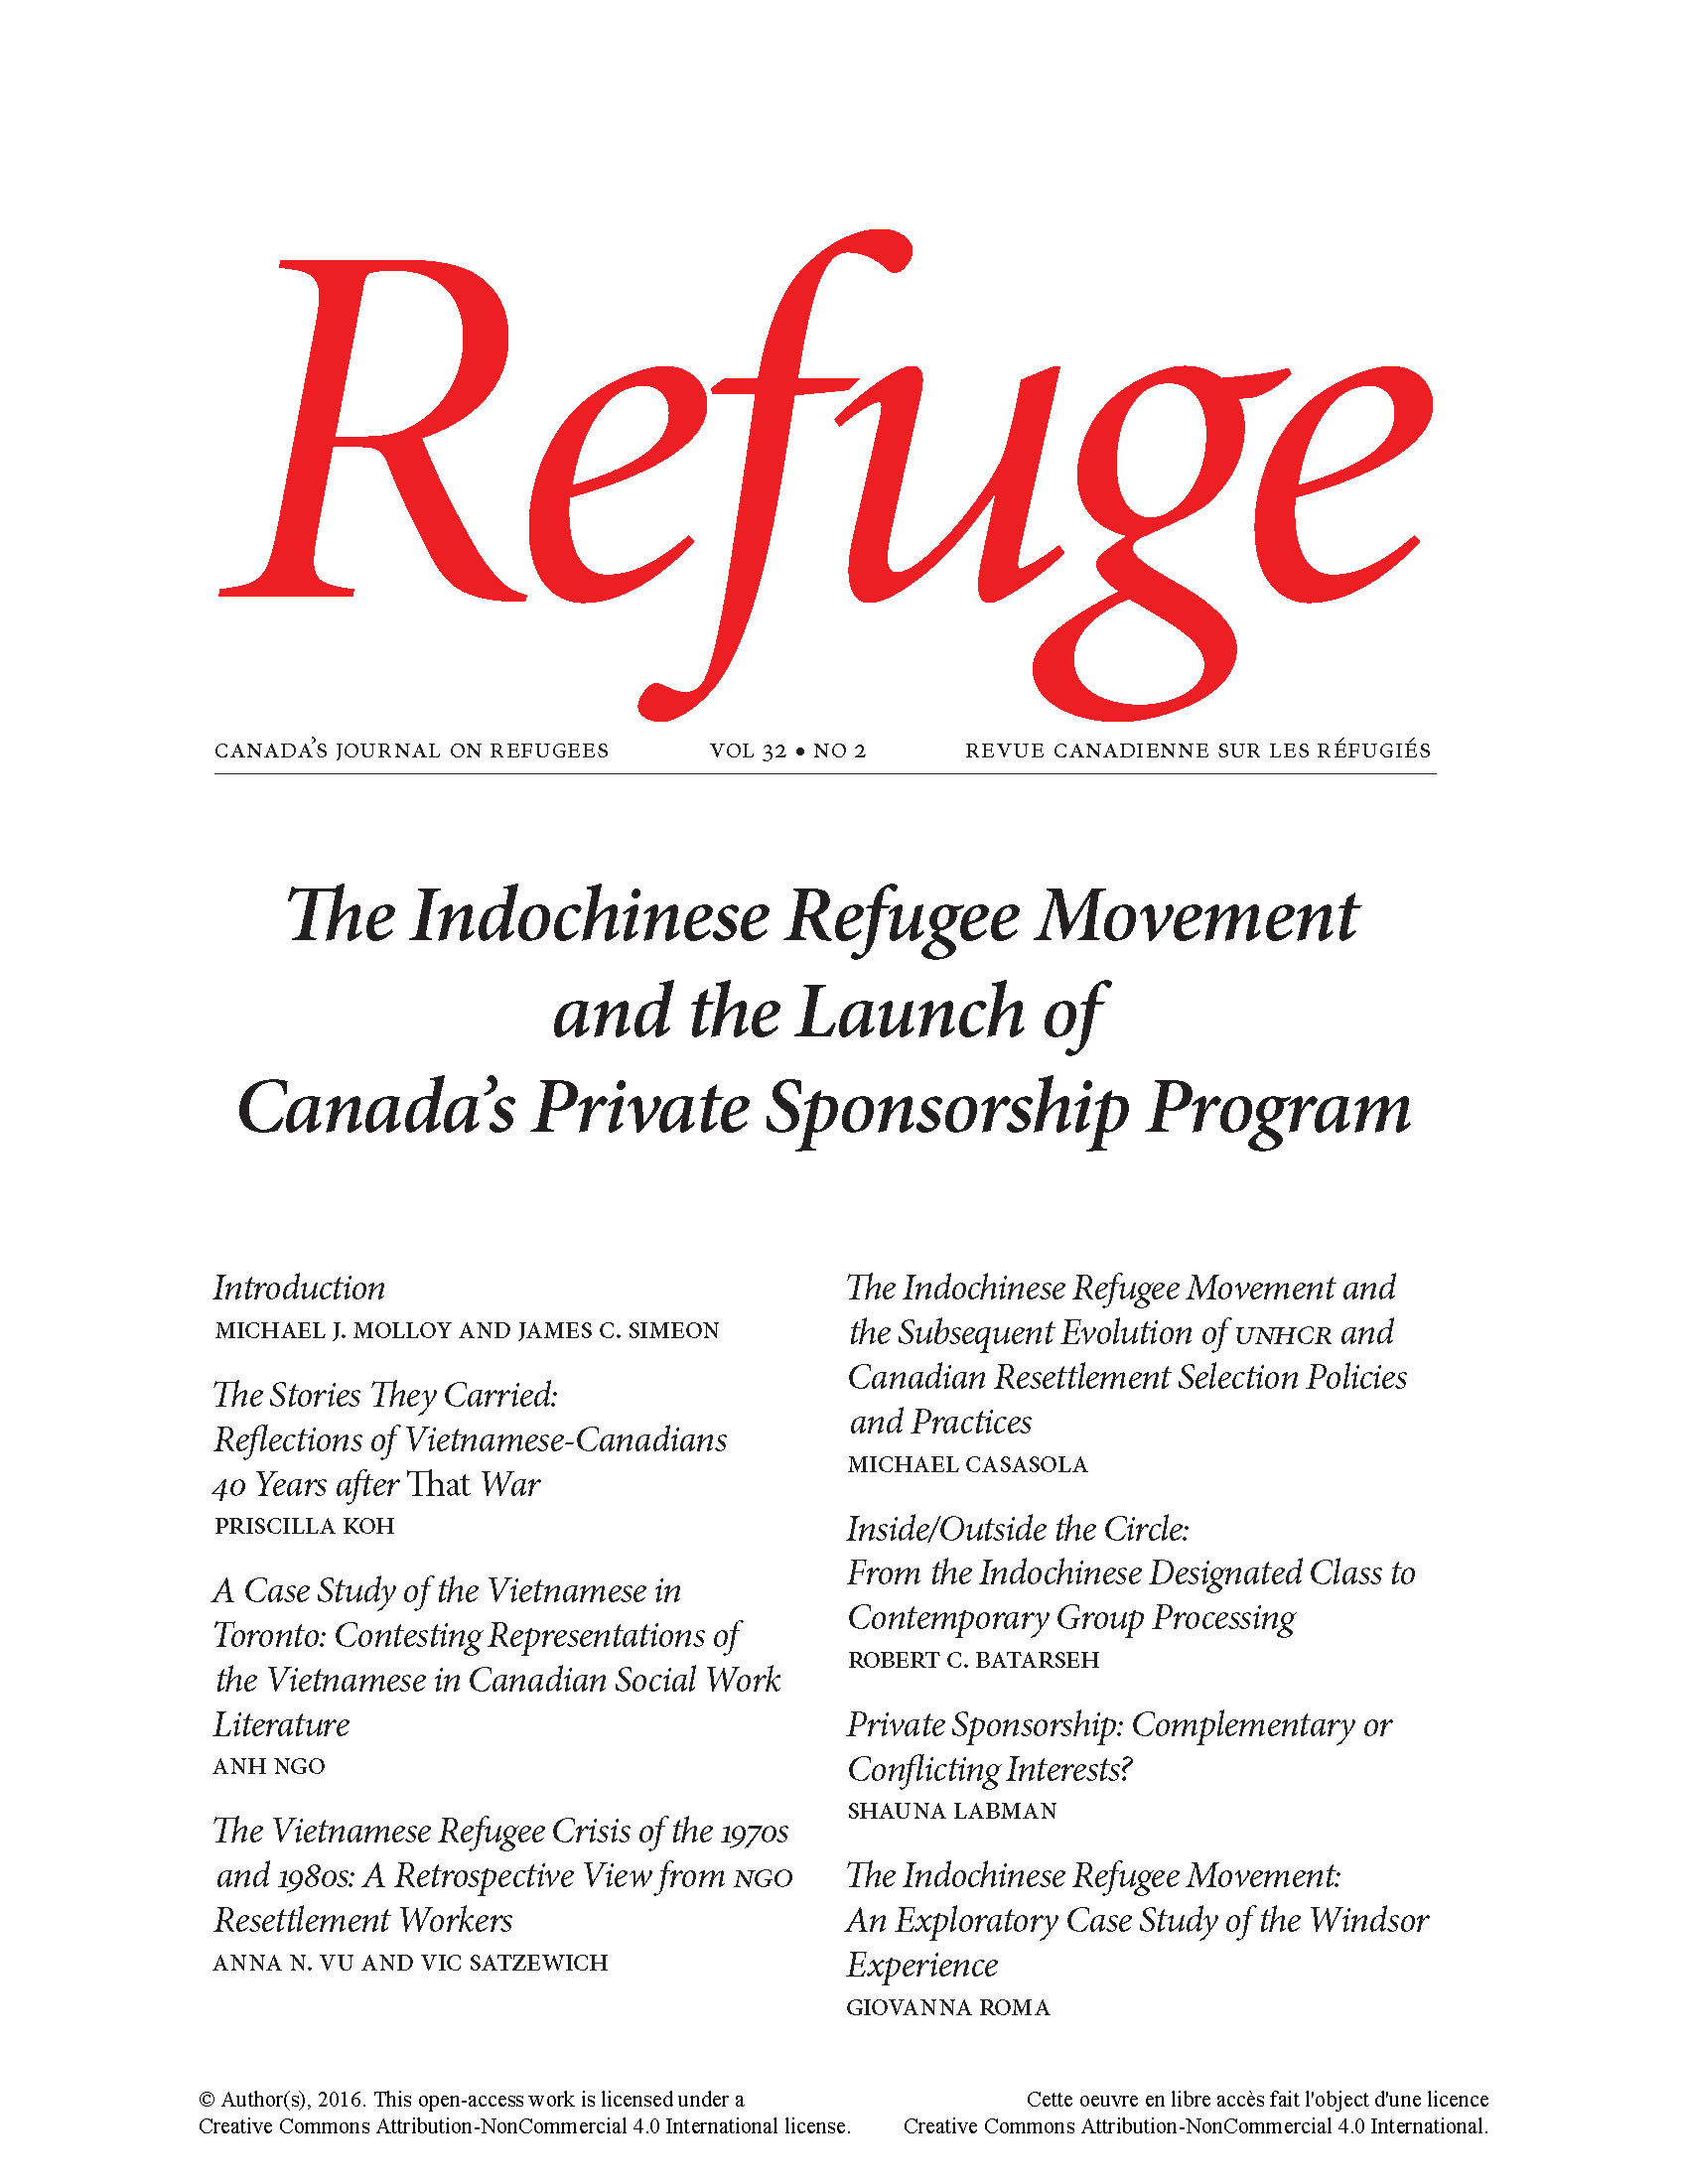 cover image of Refuge special issue Indochinese refugee movement